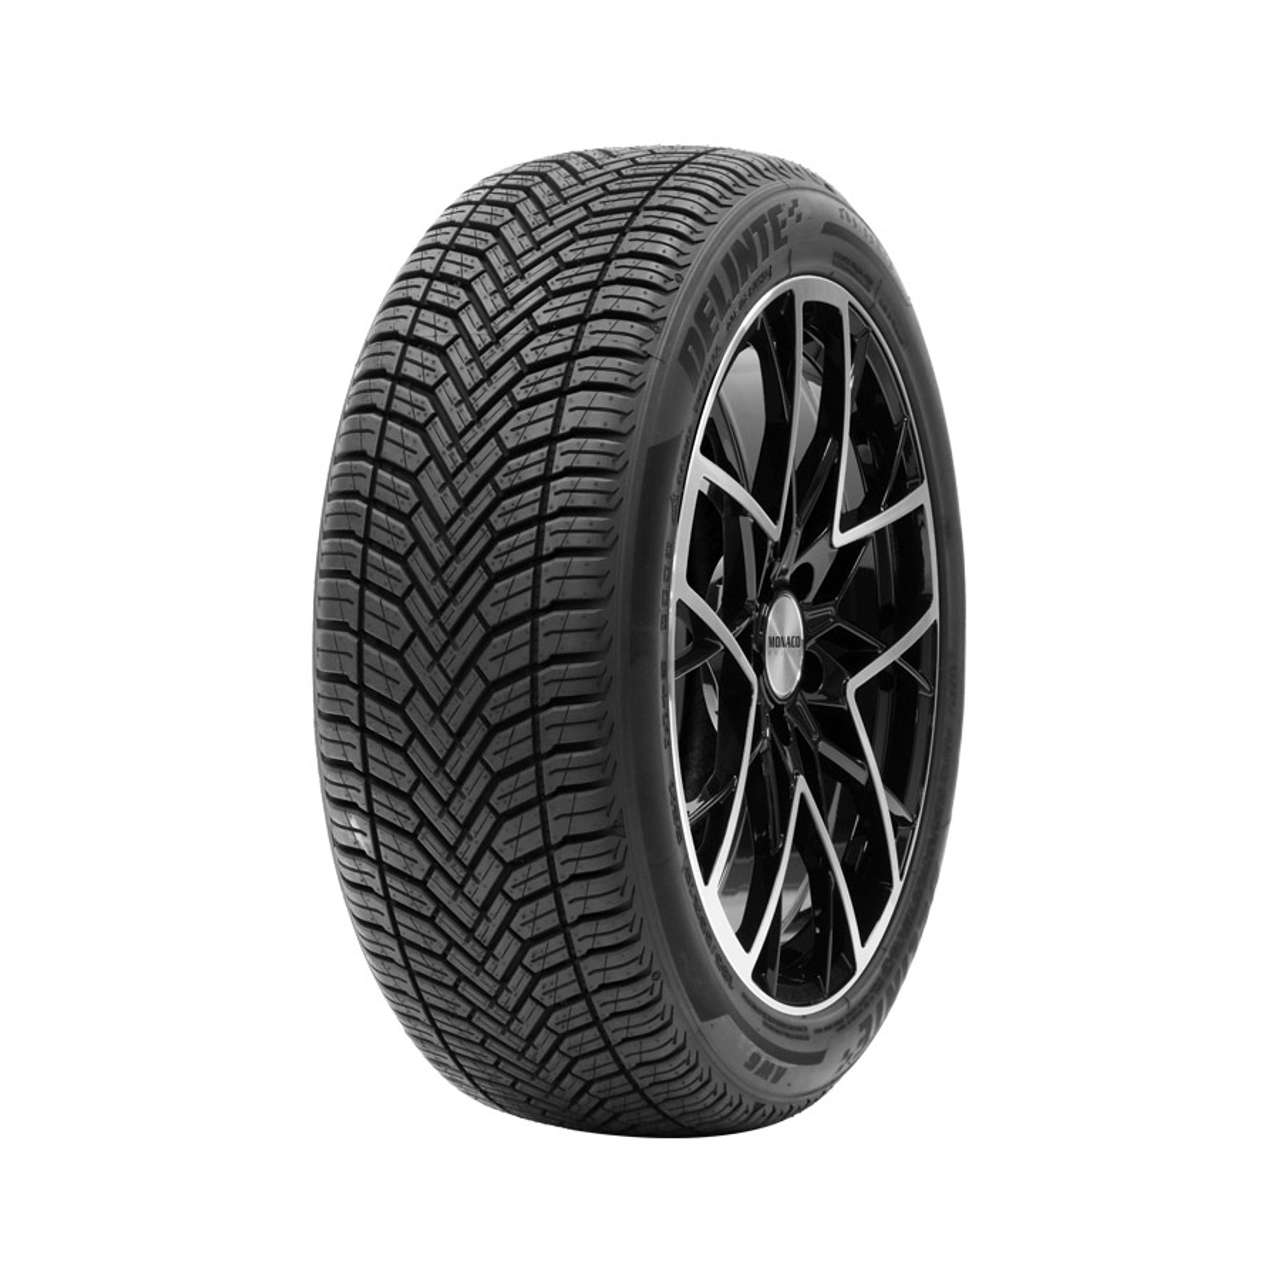 DELINTE AW6 195/55R15 85H BSW